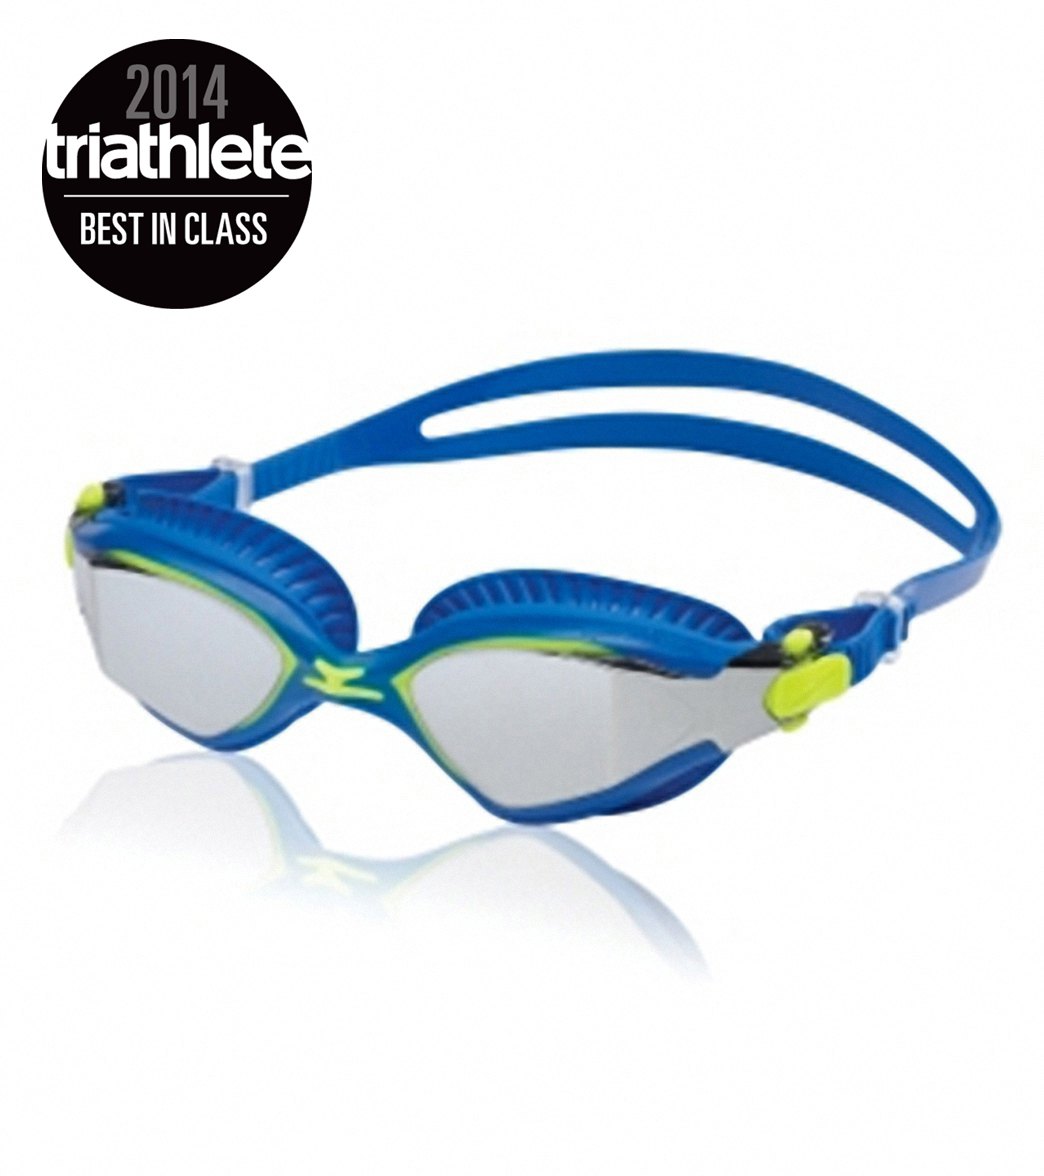 Speedo MDR 2.4 Mirrored Goggle at SwimOutlet